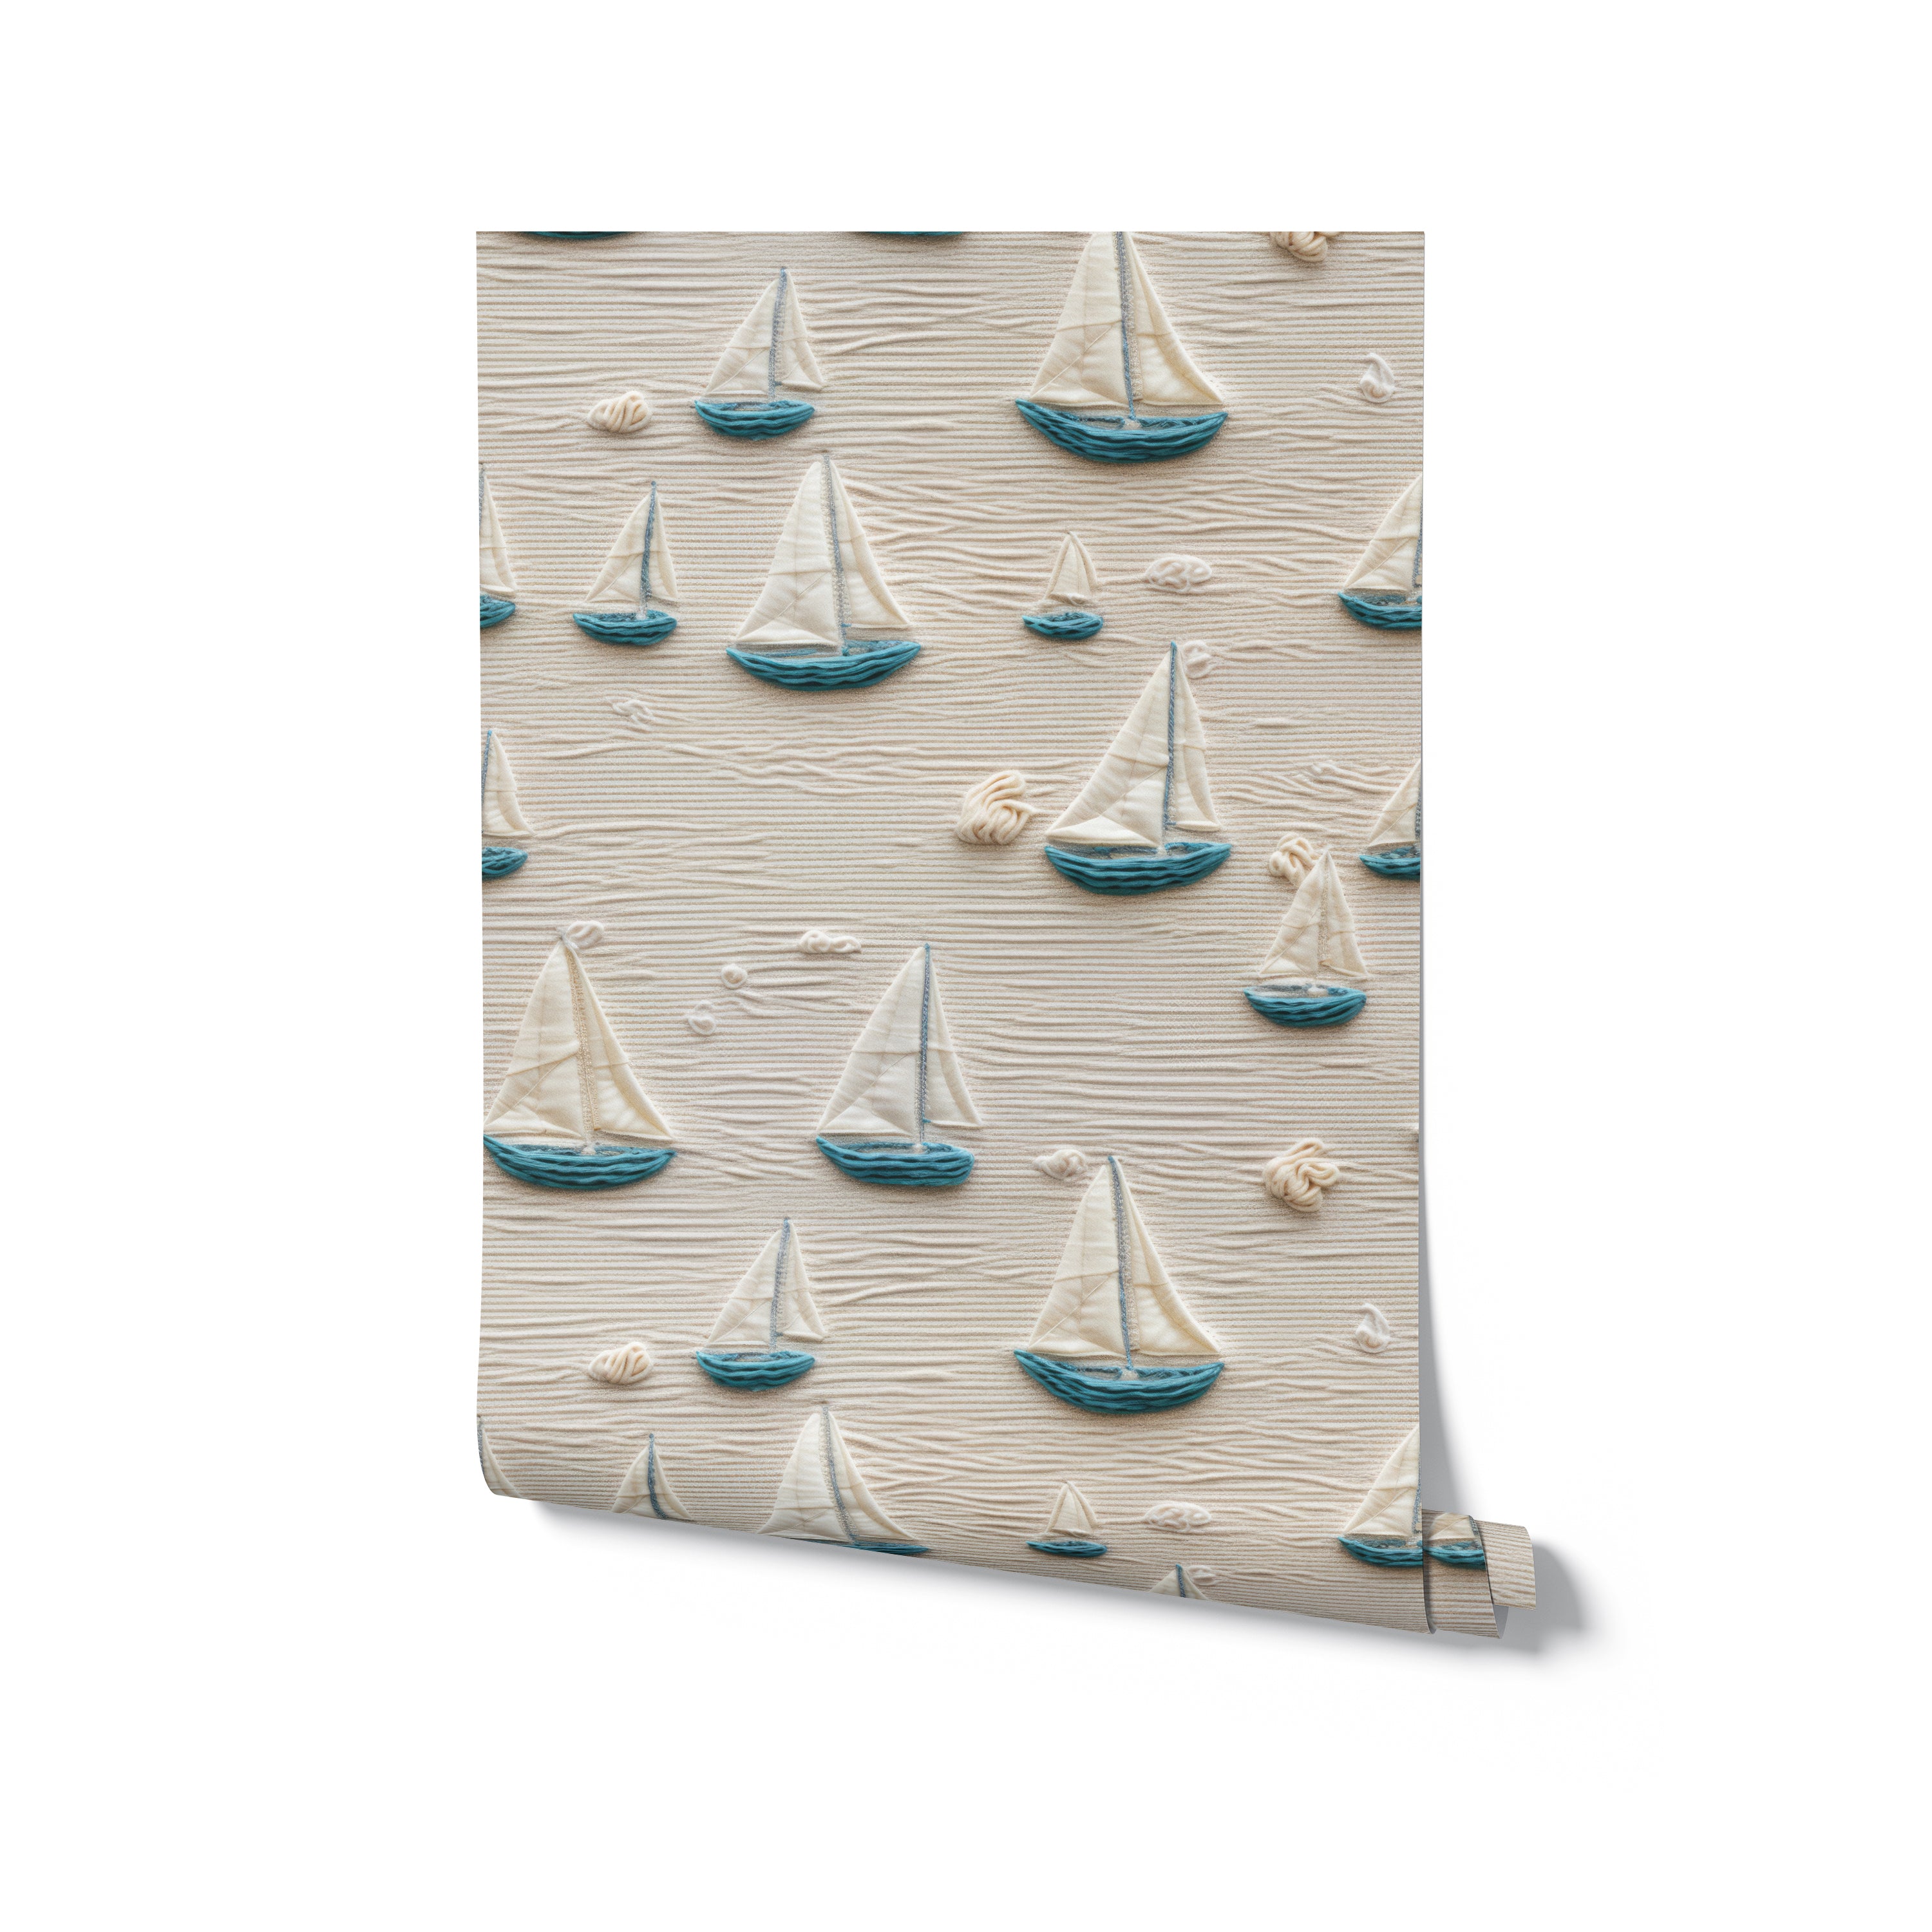 A roll of Portside Sail Wallpaper, illustrating the charming design of sailboats with teal and white hues on a textured beige background, perfect for adding a maritime touch to any space.